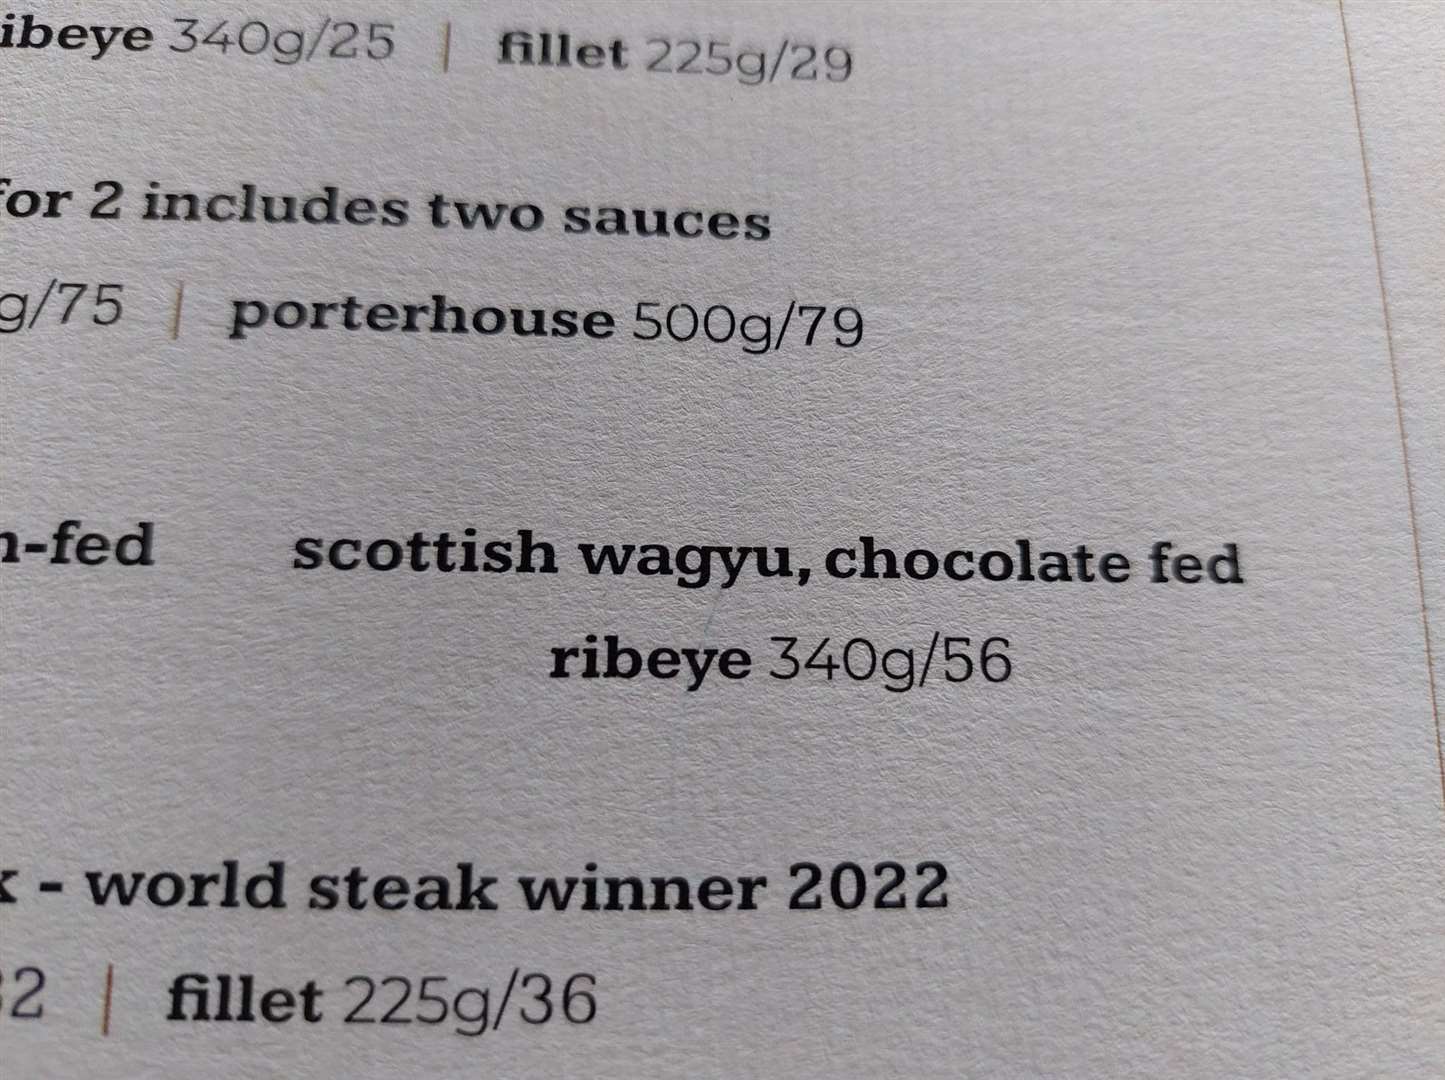 The chocolate-fed wagyu comes in at £56 per portion